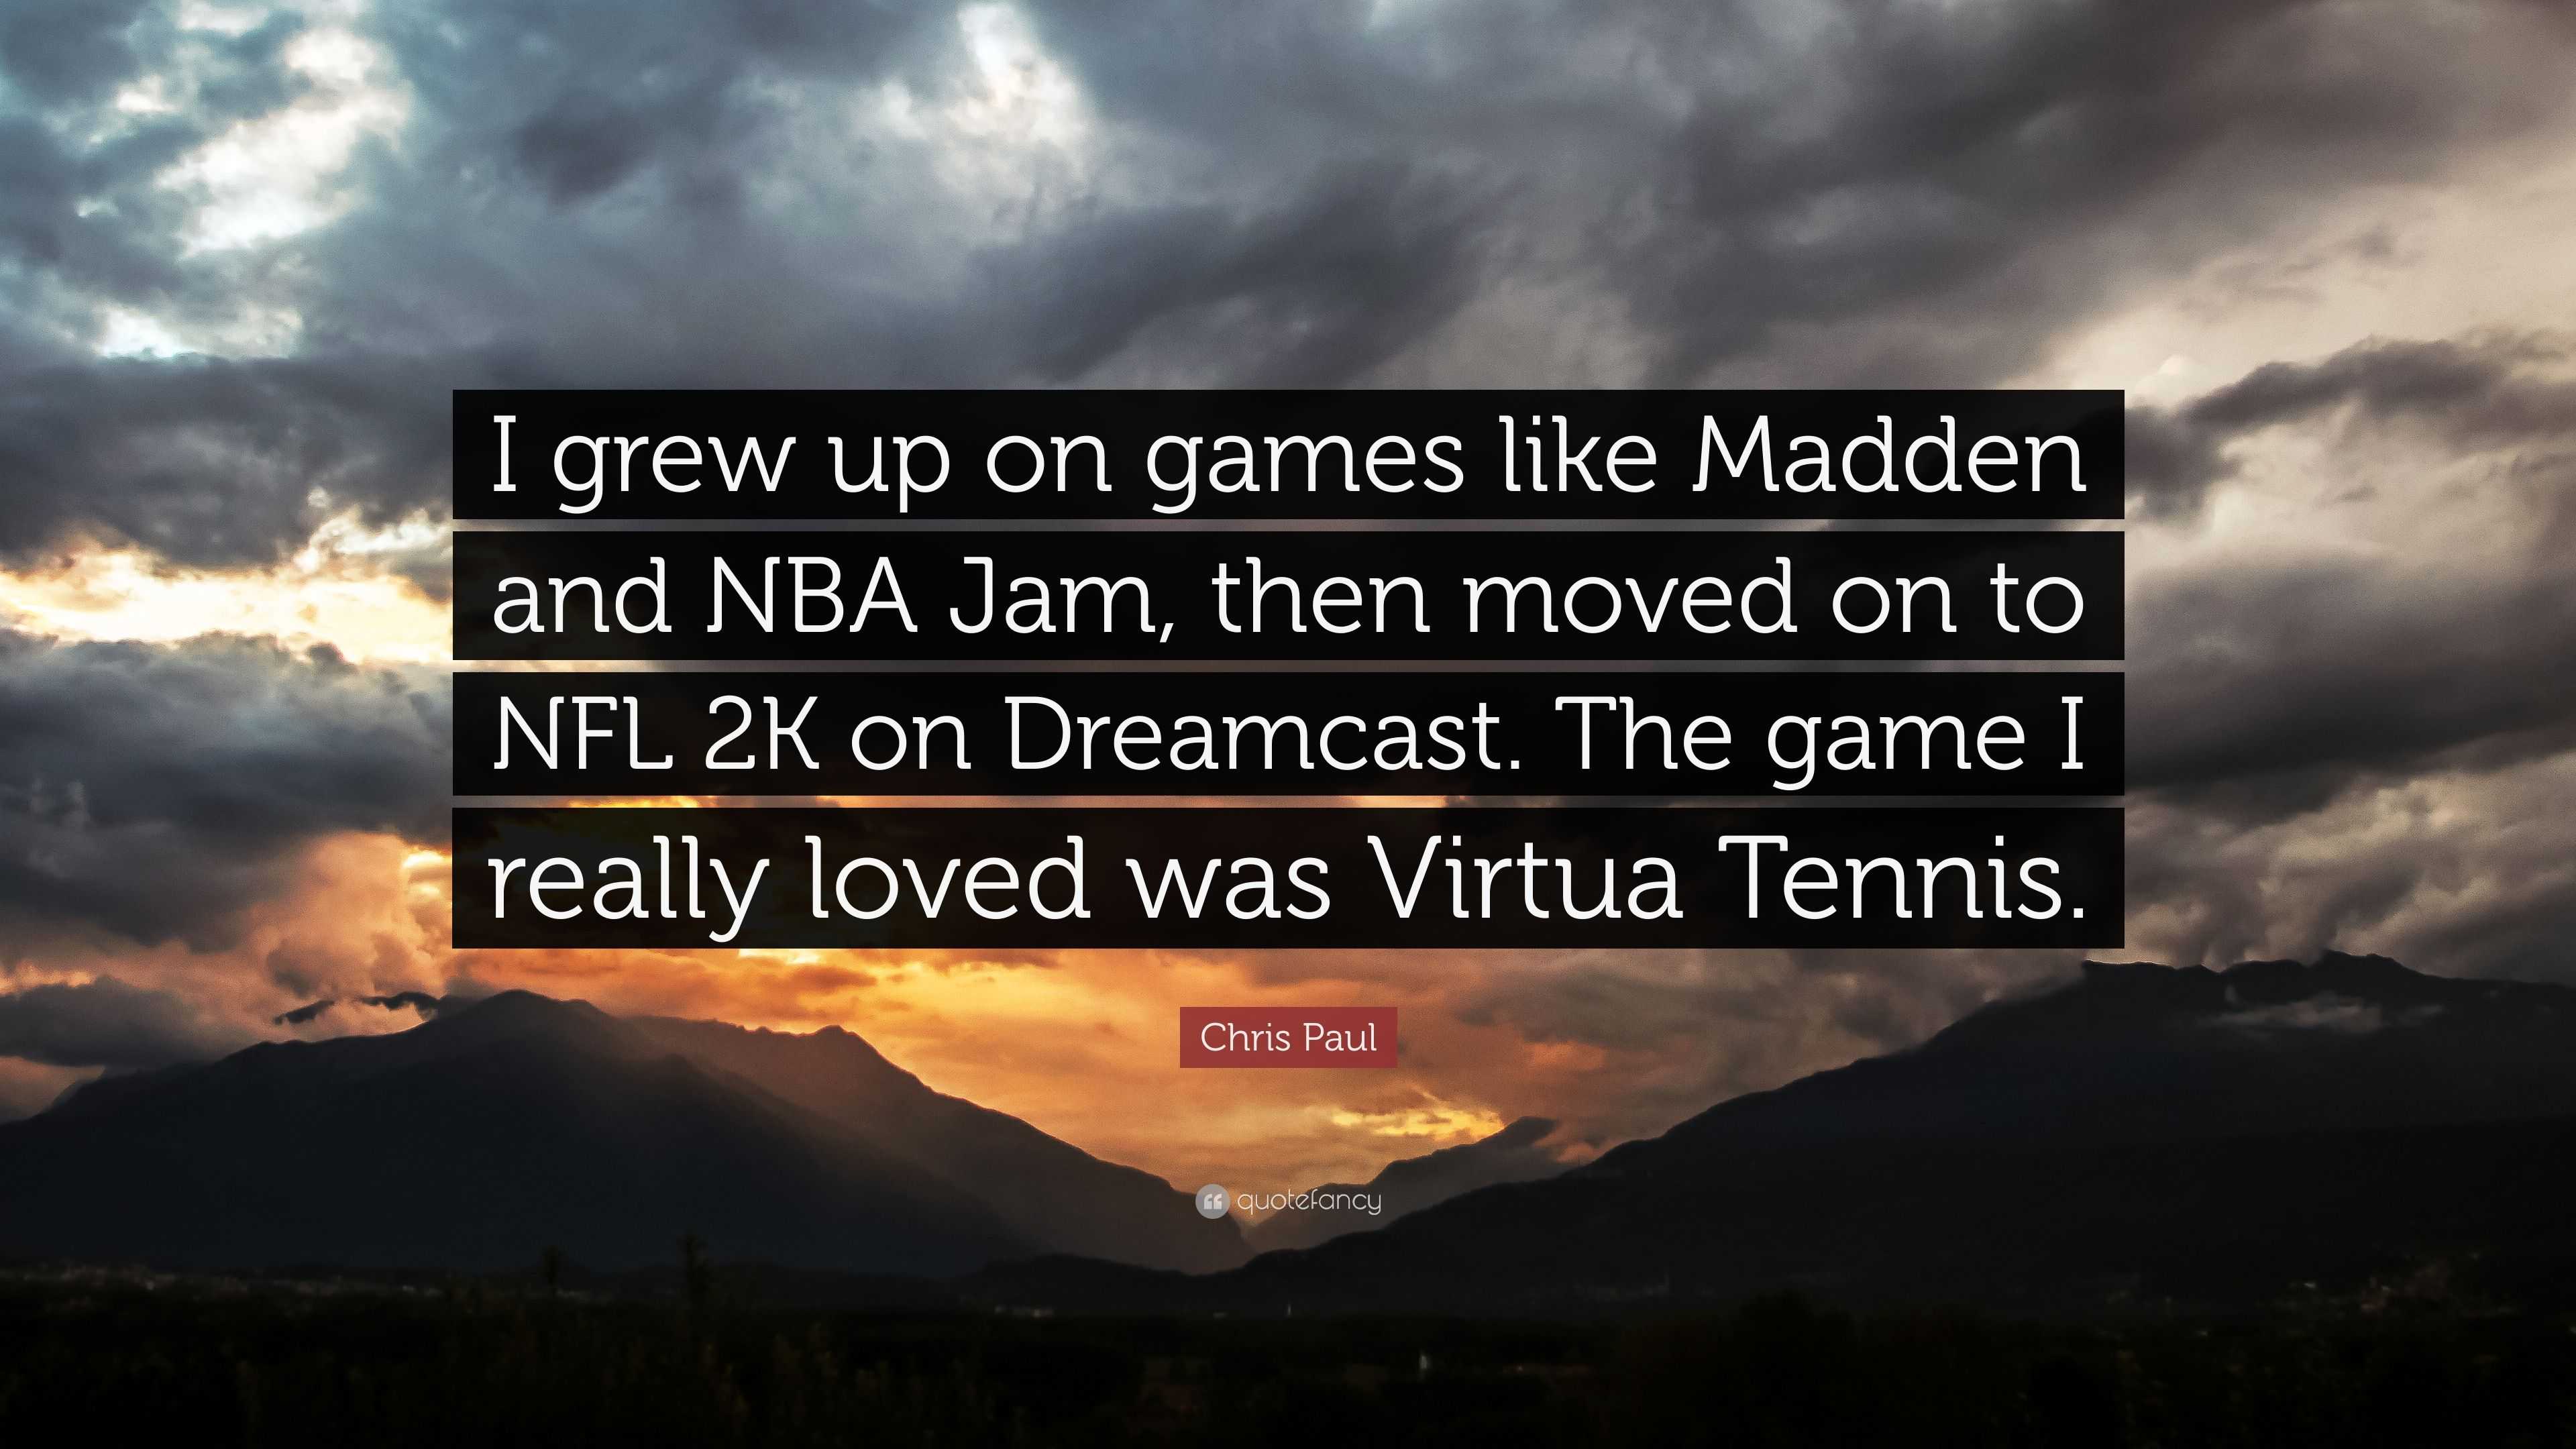 Chris Paul Quote I Grew Up On Games Like Madden And Nba Jam Then Moved On To Nfl 2k On Dreamcast The Game I Really Loved Was Virtua Ten